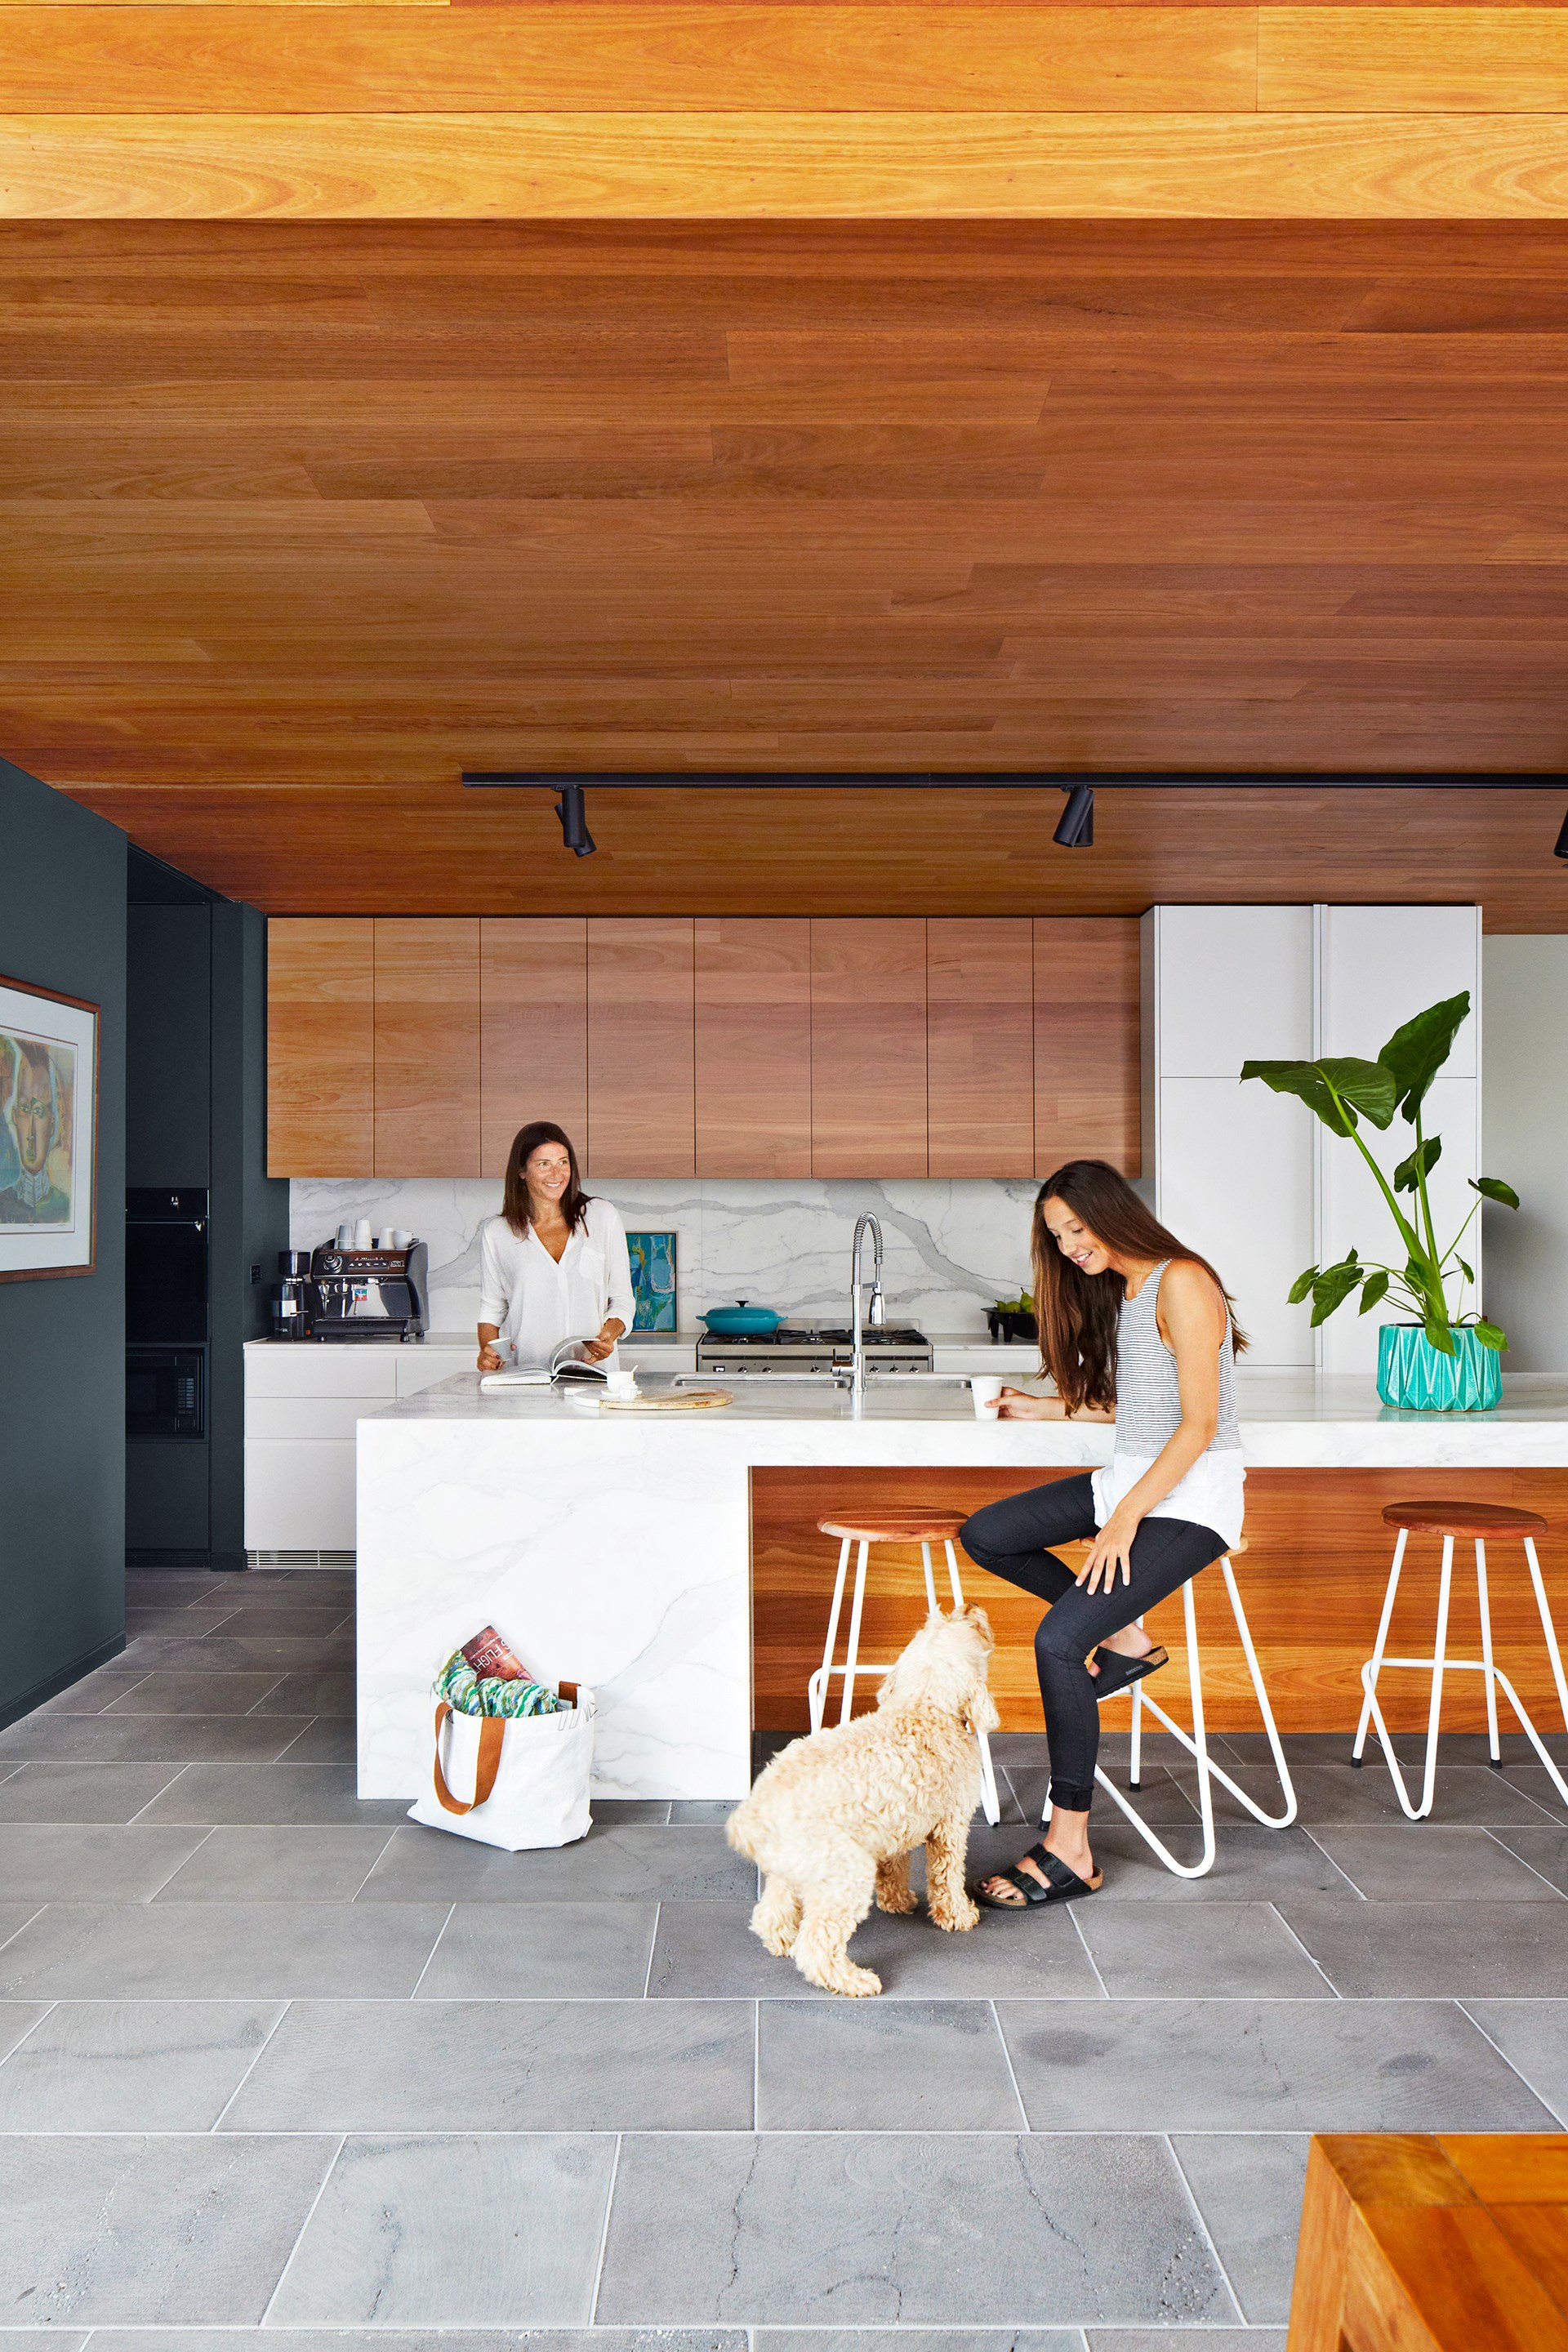 A blackbutt timber clad ceiling adds warmth and coziness to the streamlined kitchen within this [Modernist Melbourne home](http://www.homestolove.com.au/gallery-stephen-and-tanyas-melbourne-home-reno-2286).